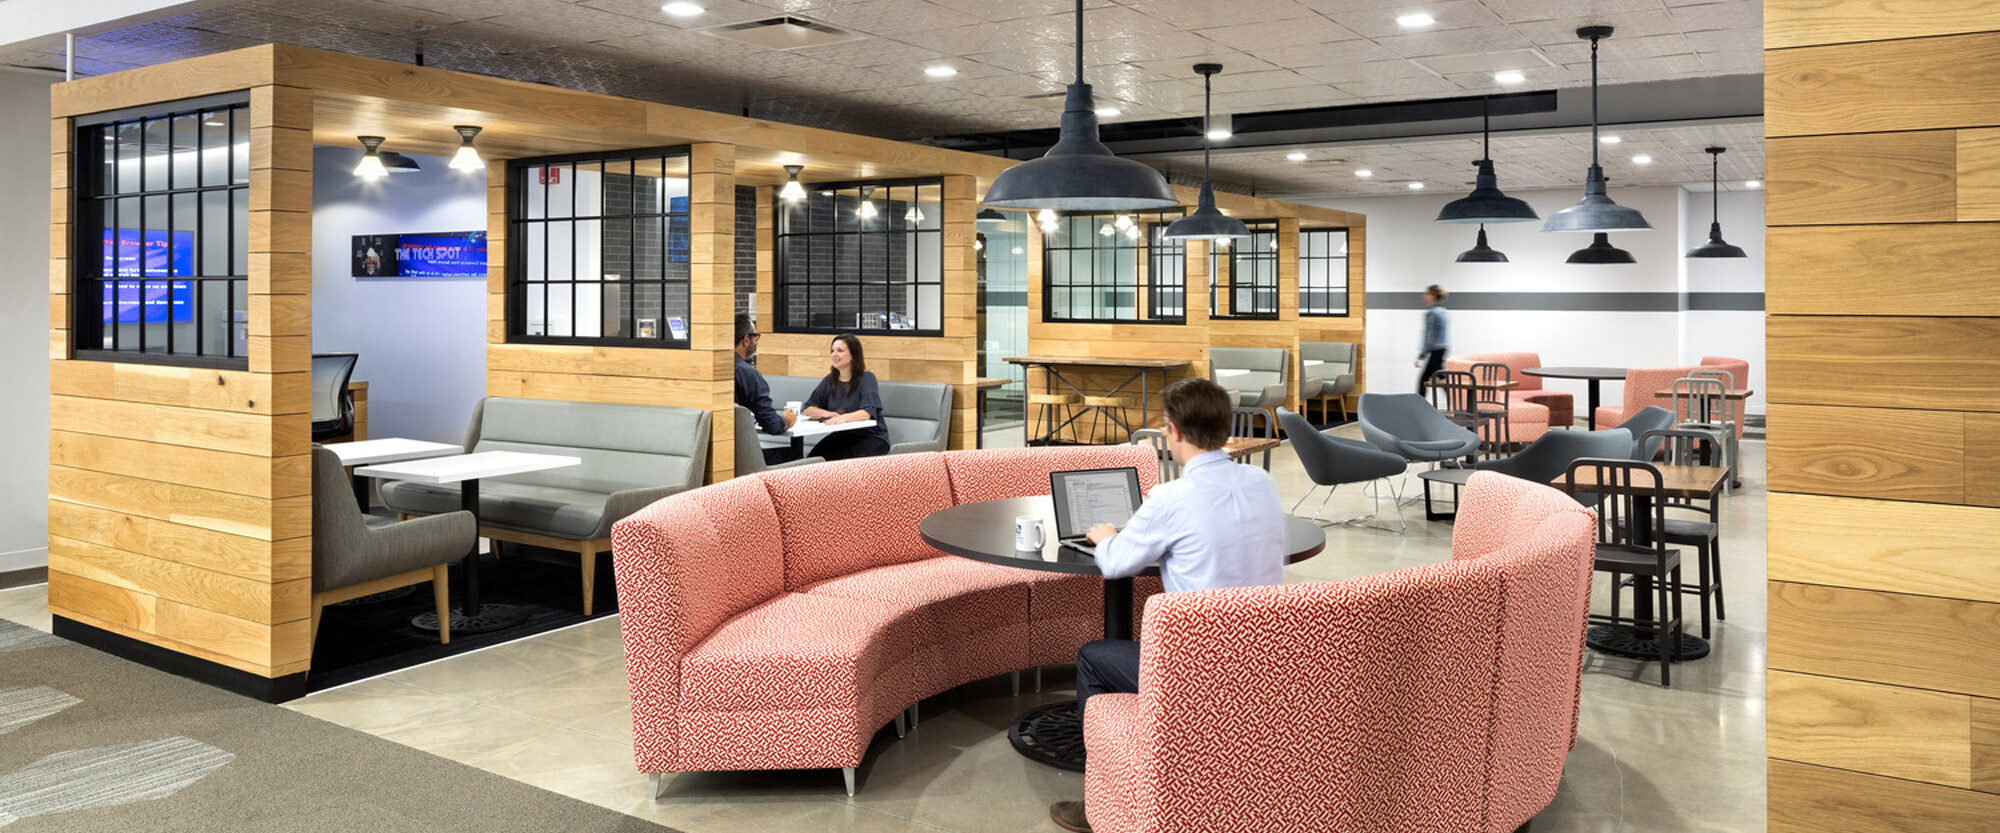 Modern office breakroom featuring a cohesive blend of natural wood structures and industrial-style pendant lighting. Curved coral sofas provide a pop of color, complemented by gray lounge chairs and bar-style seating, creating a multifunctional, inviting space for collaboration and relaxation.